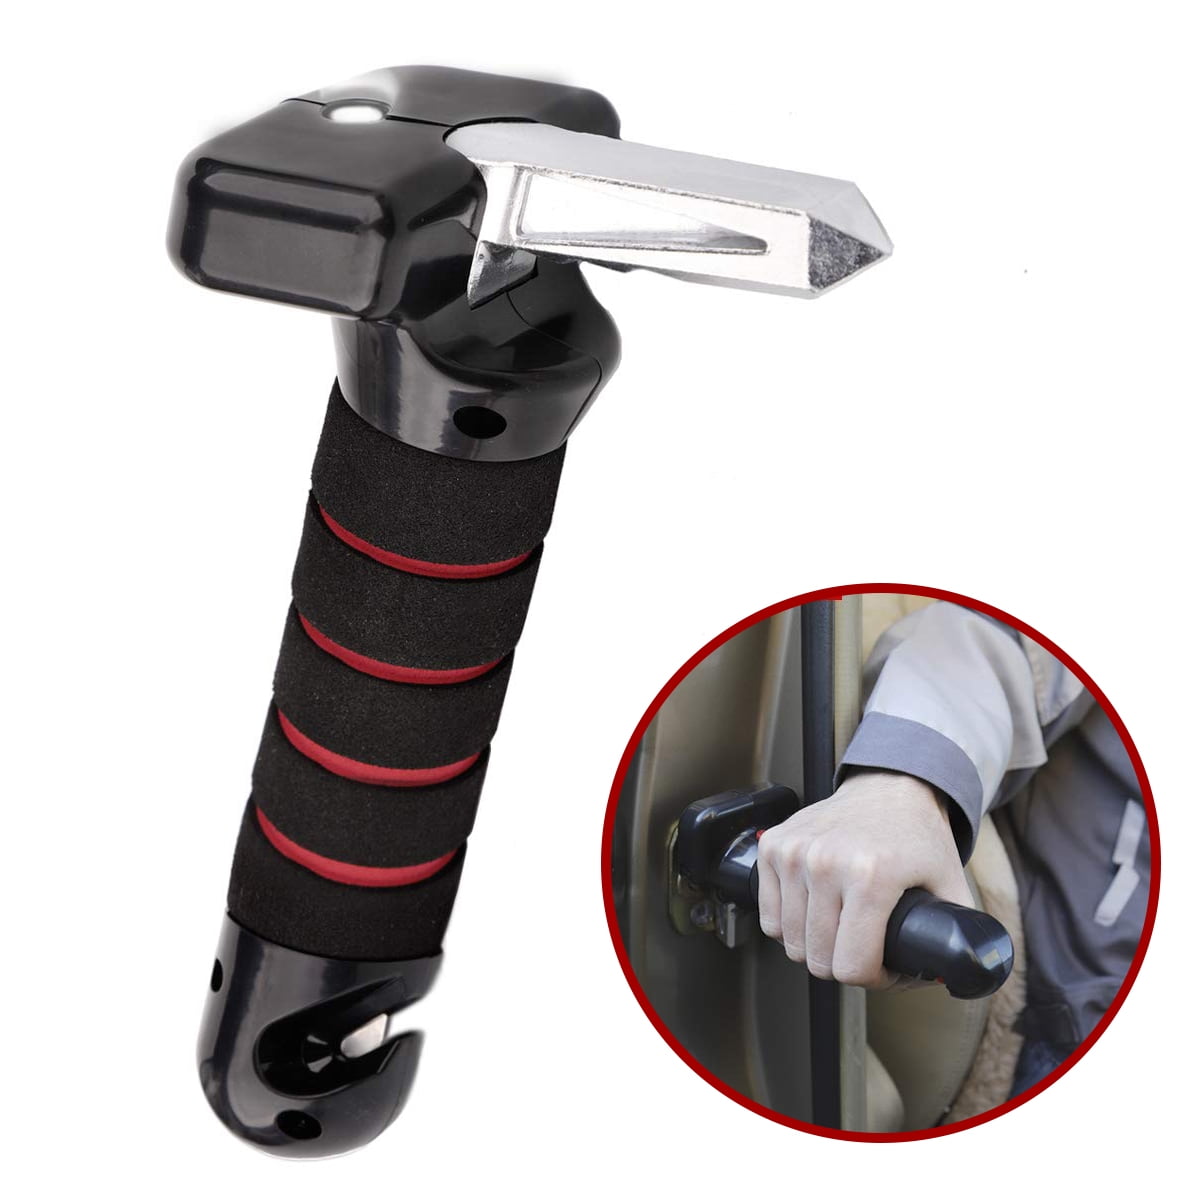 4 Car Crane Car door Handle Portable Vehicle Support Handle Window Breaker Car Standing Mobility Aid Car Assist Cane Grab Bar Multifunction Handle for Disabled Handicapped Elderly Aids for Living,Blue 